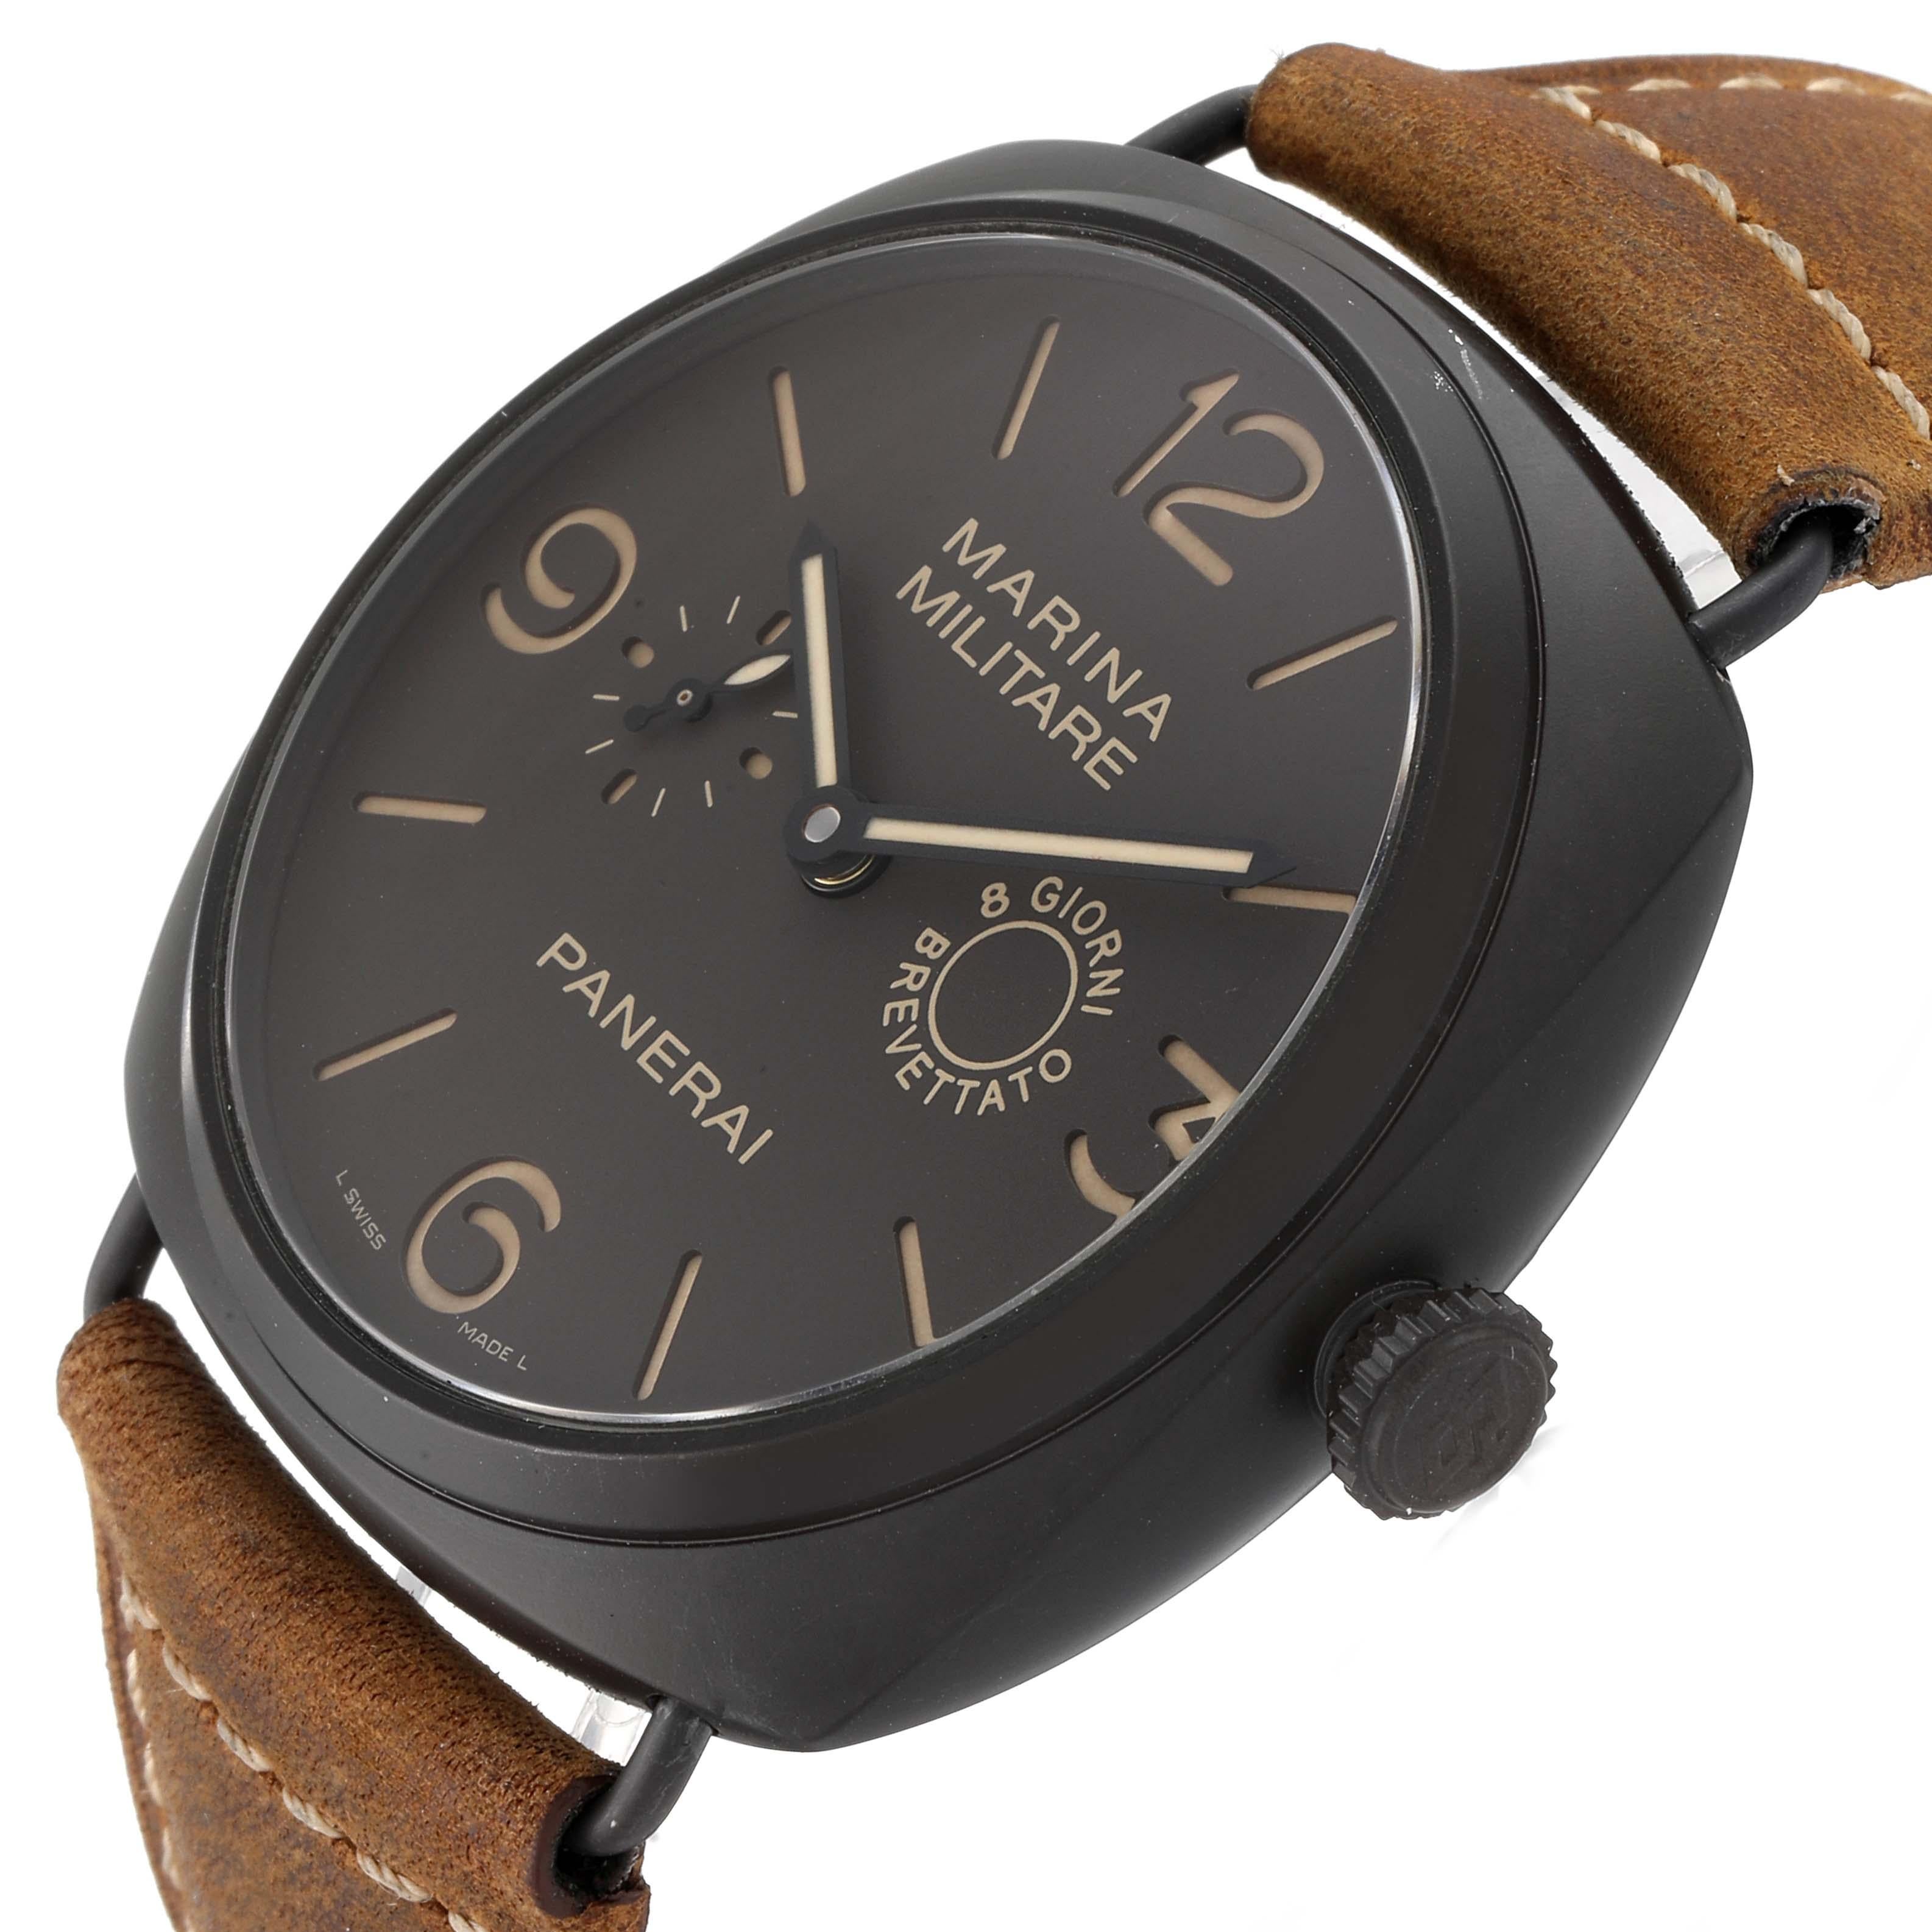 Panerai Radiomir Composite Marina Brown Dial Mens Watch PAM00339 Box Papers In Excellent Condition For Sale In Atlanta, GA